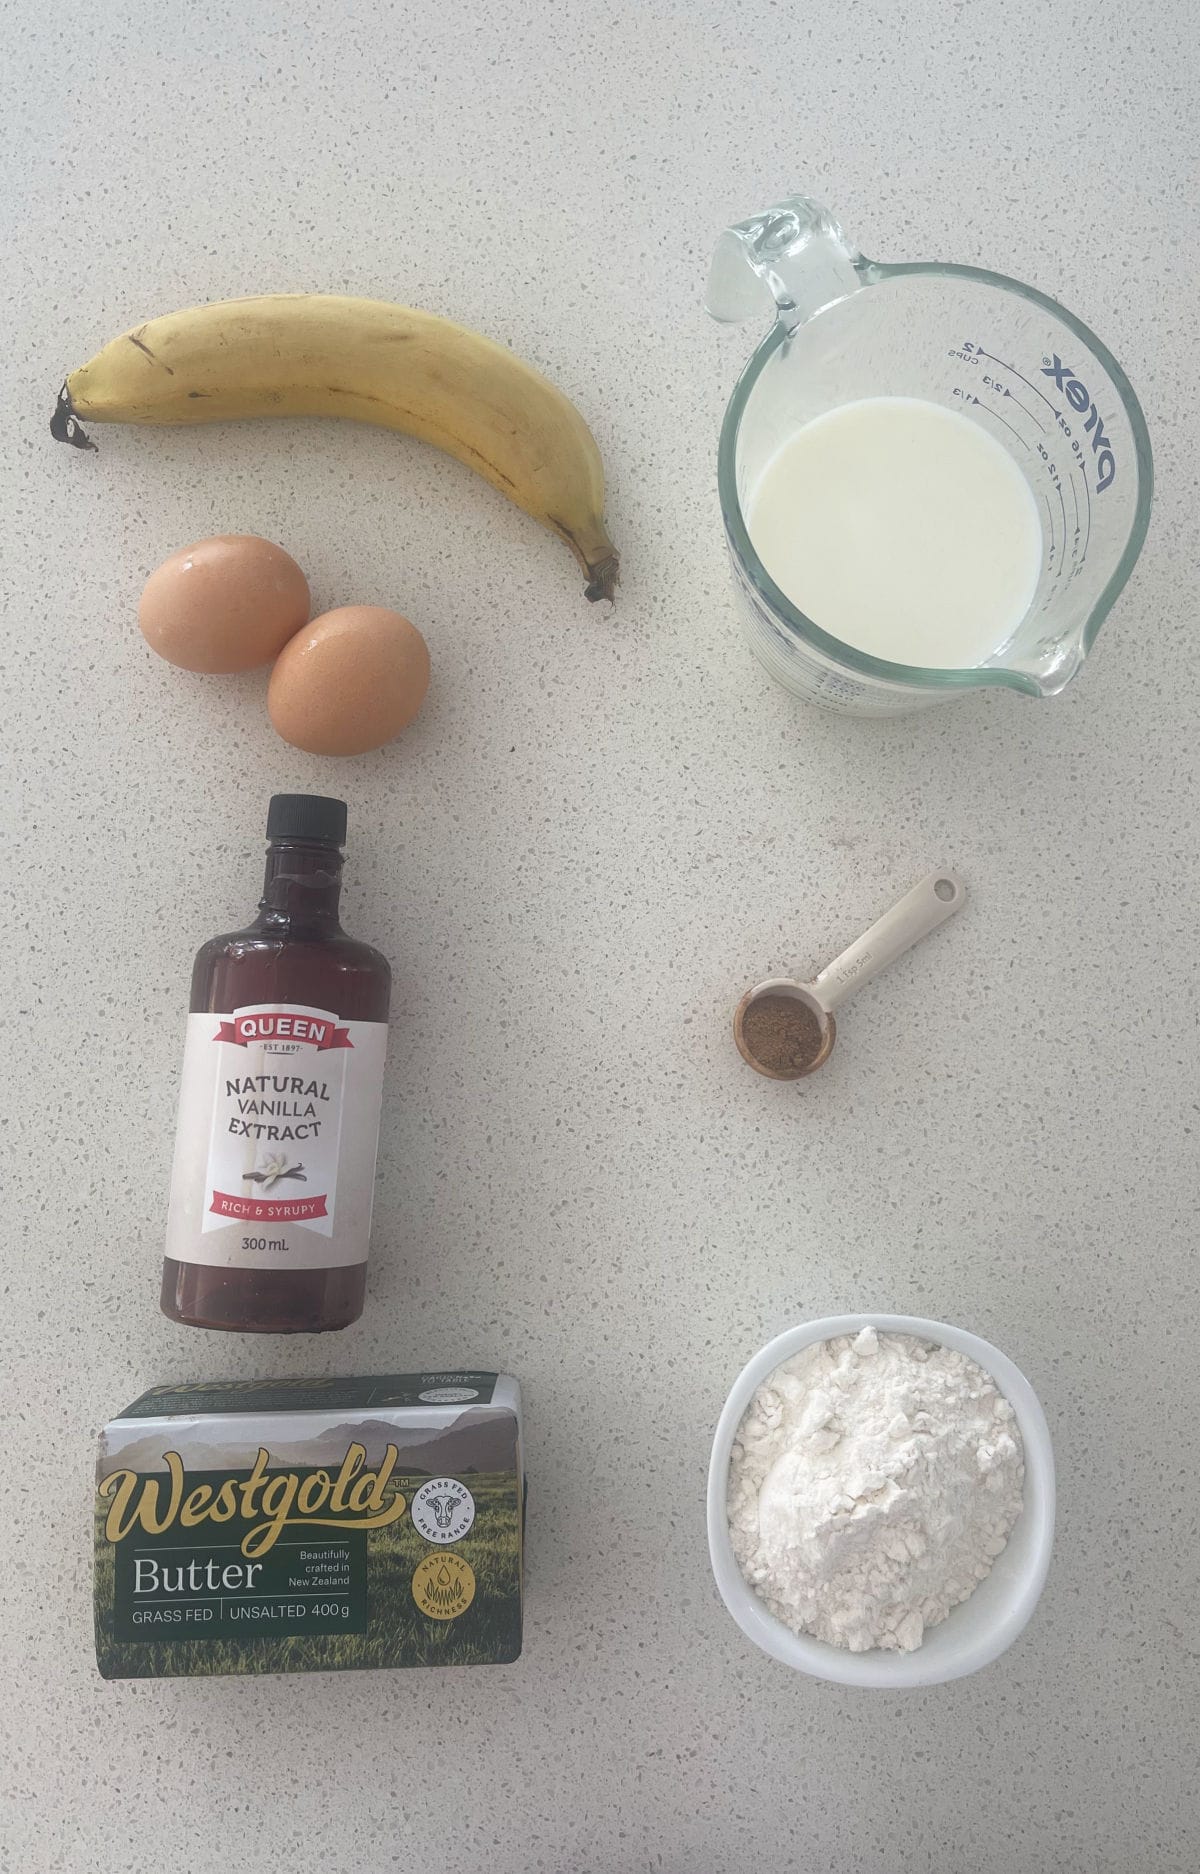 Ingredients to make Banana Pancakes in a Thermomix on a speckled bench.